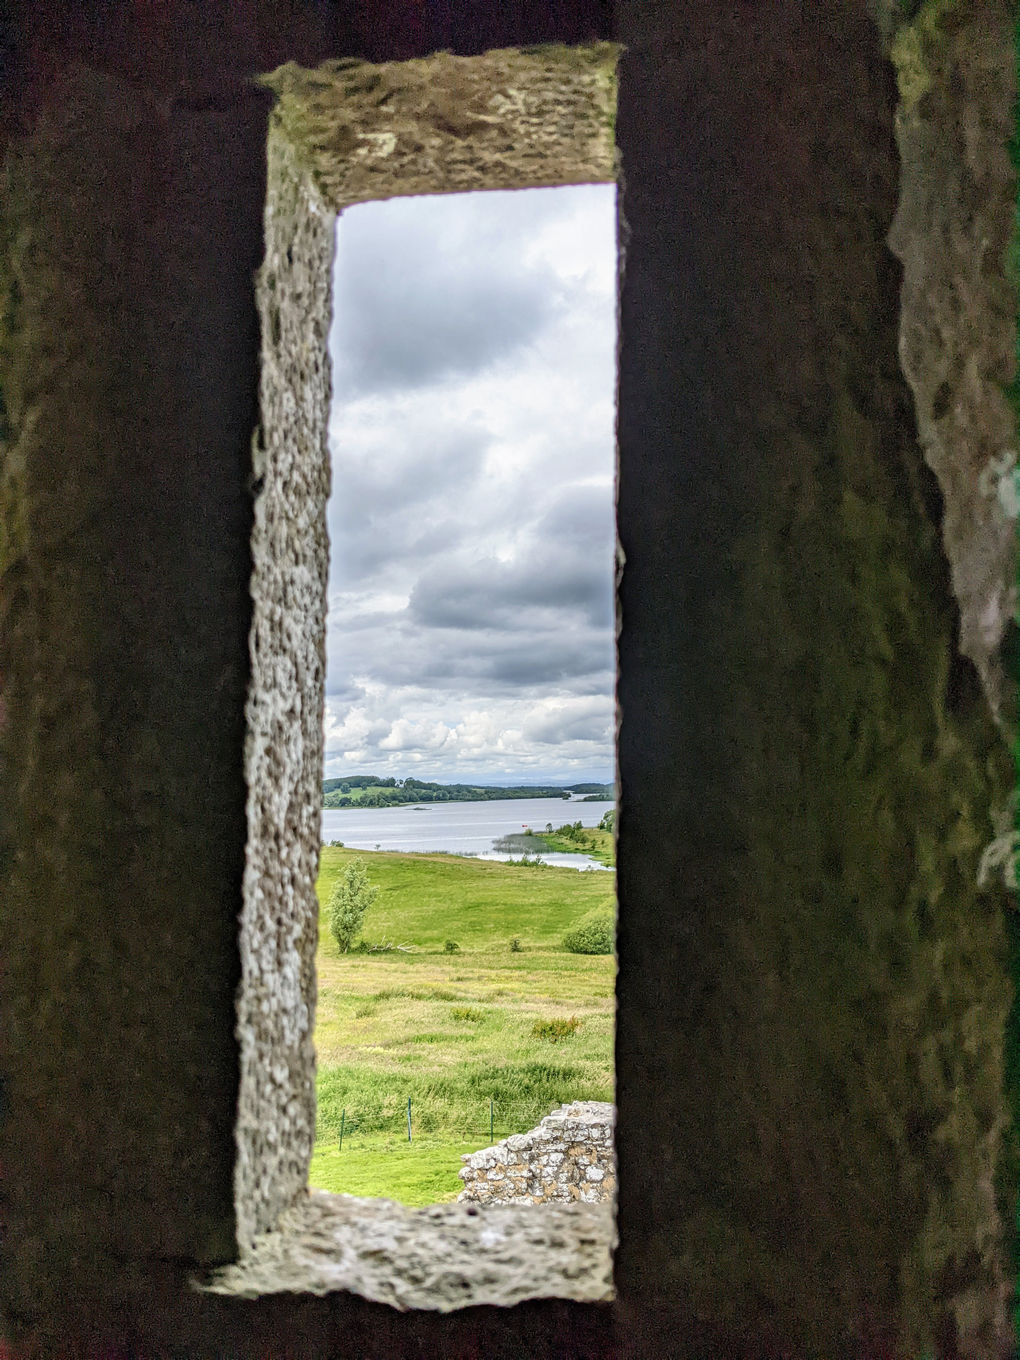 View of Lough Erne.